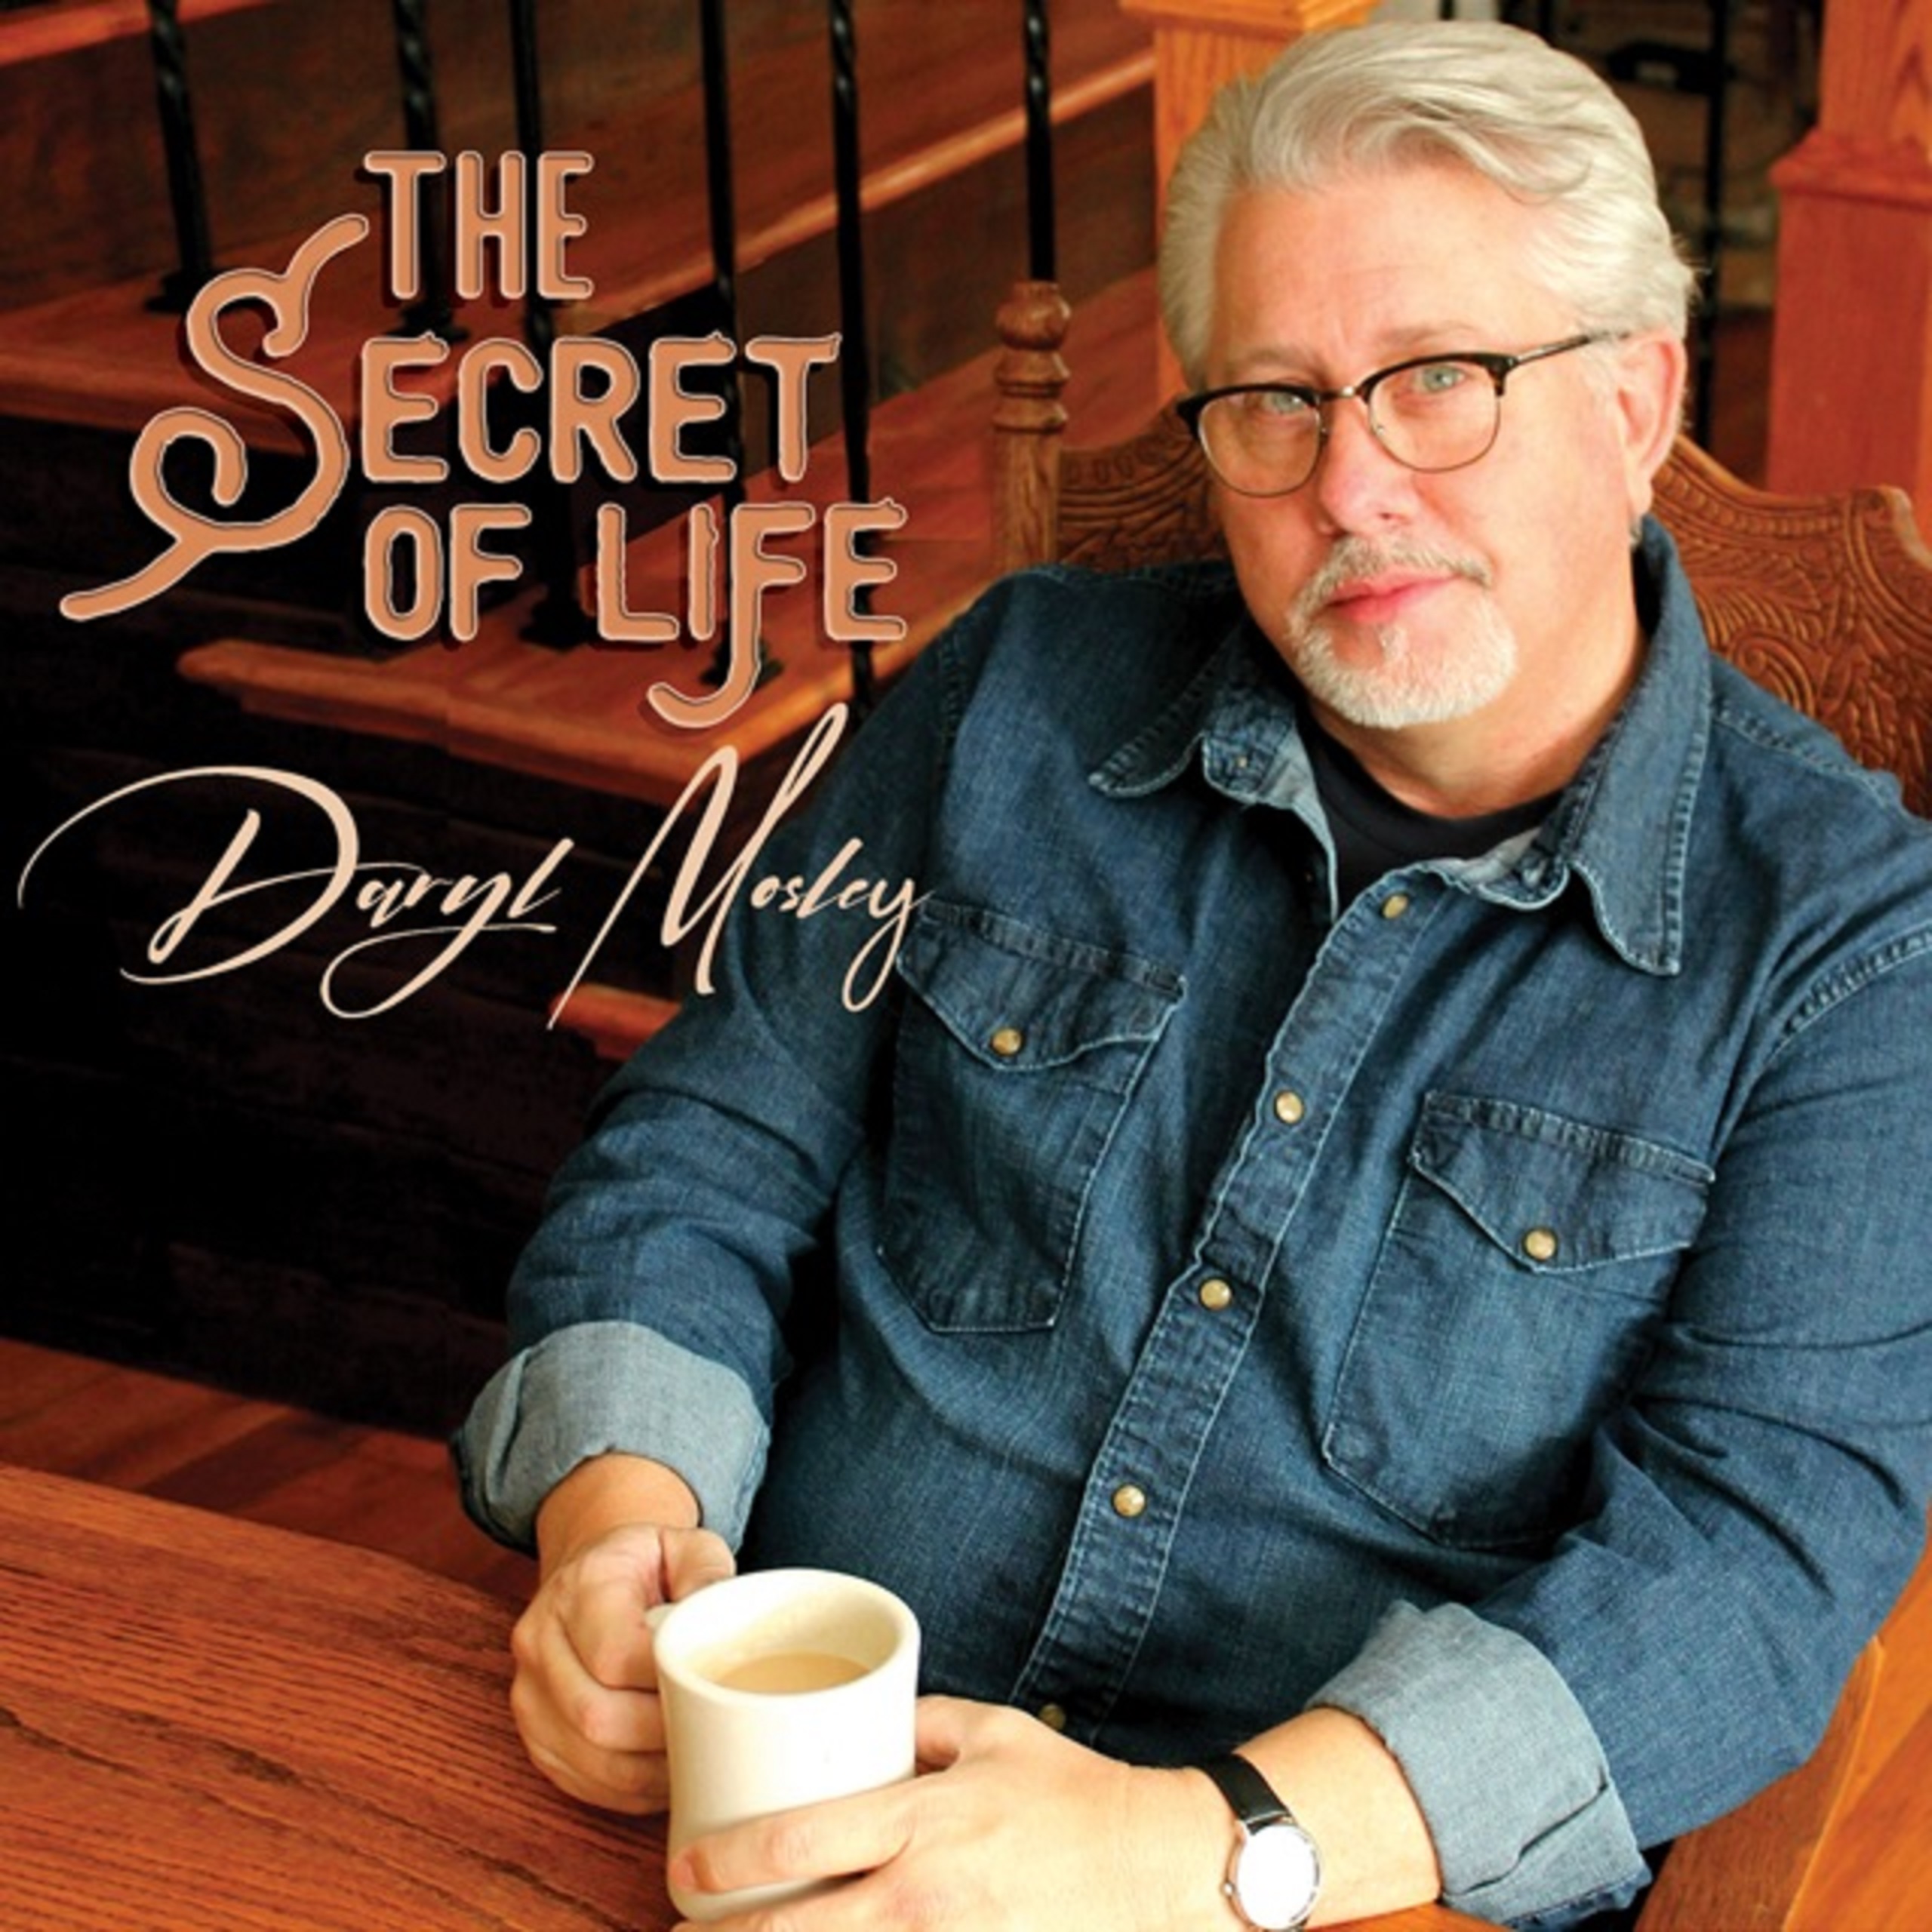 Daryl Mosley Reveals 'The Secret Of Life' With Debut Solo Album